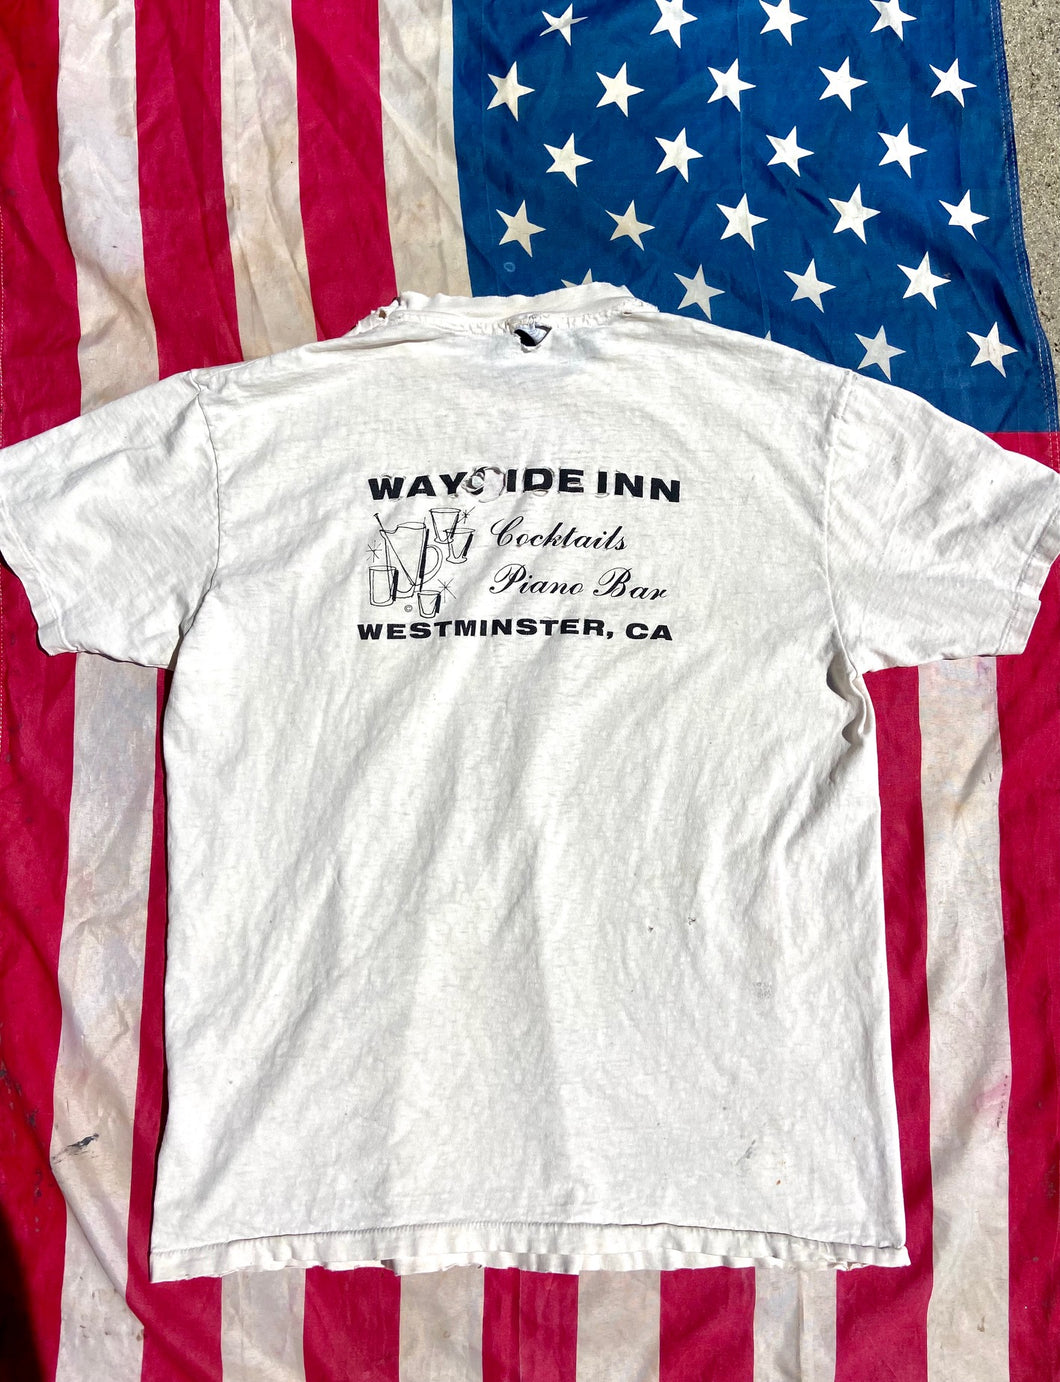 Super vintage Bar tshirt, the Wayside Inn Cocktail and Piano Bar , Westminister CA.  Size XL fits like a big Large